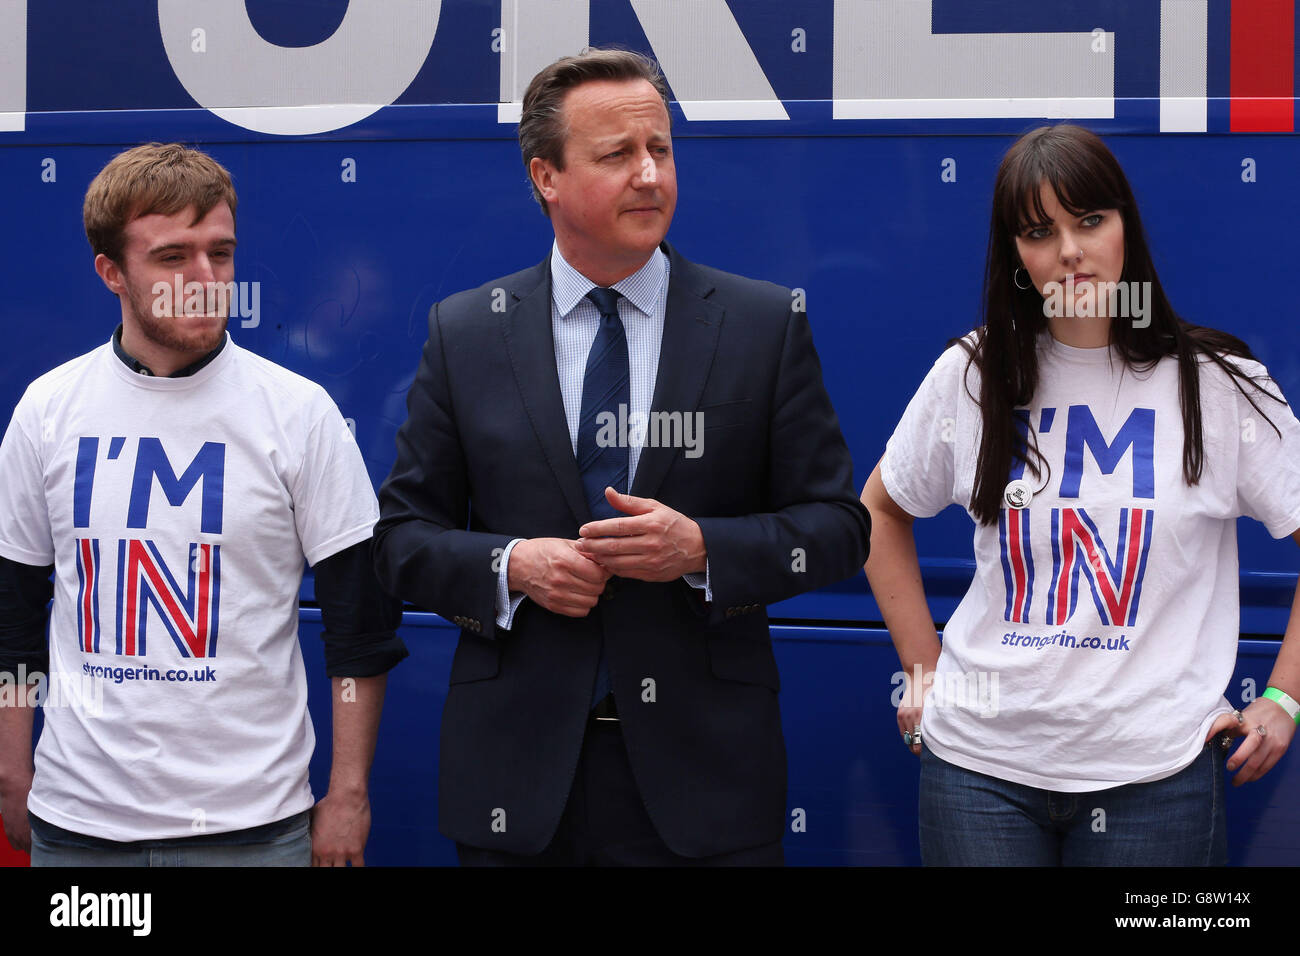 Prime Minister David Cameron joins students at the launch of the 'Brighter Future In' campaign bus at Exeter University in Devon, after he said he will 'make no apology' for spending more than &Acirc;£9 million of taxpayers' money on a pro-EU publicity drive ahead of the referendum on Britain's future membership. Stock Photo